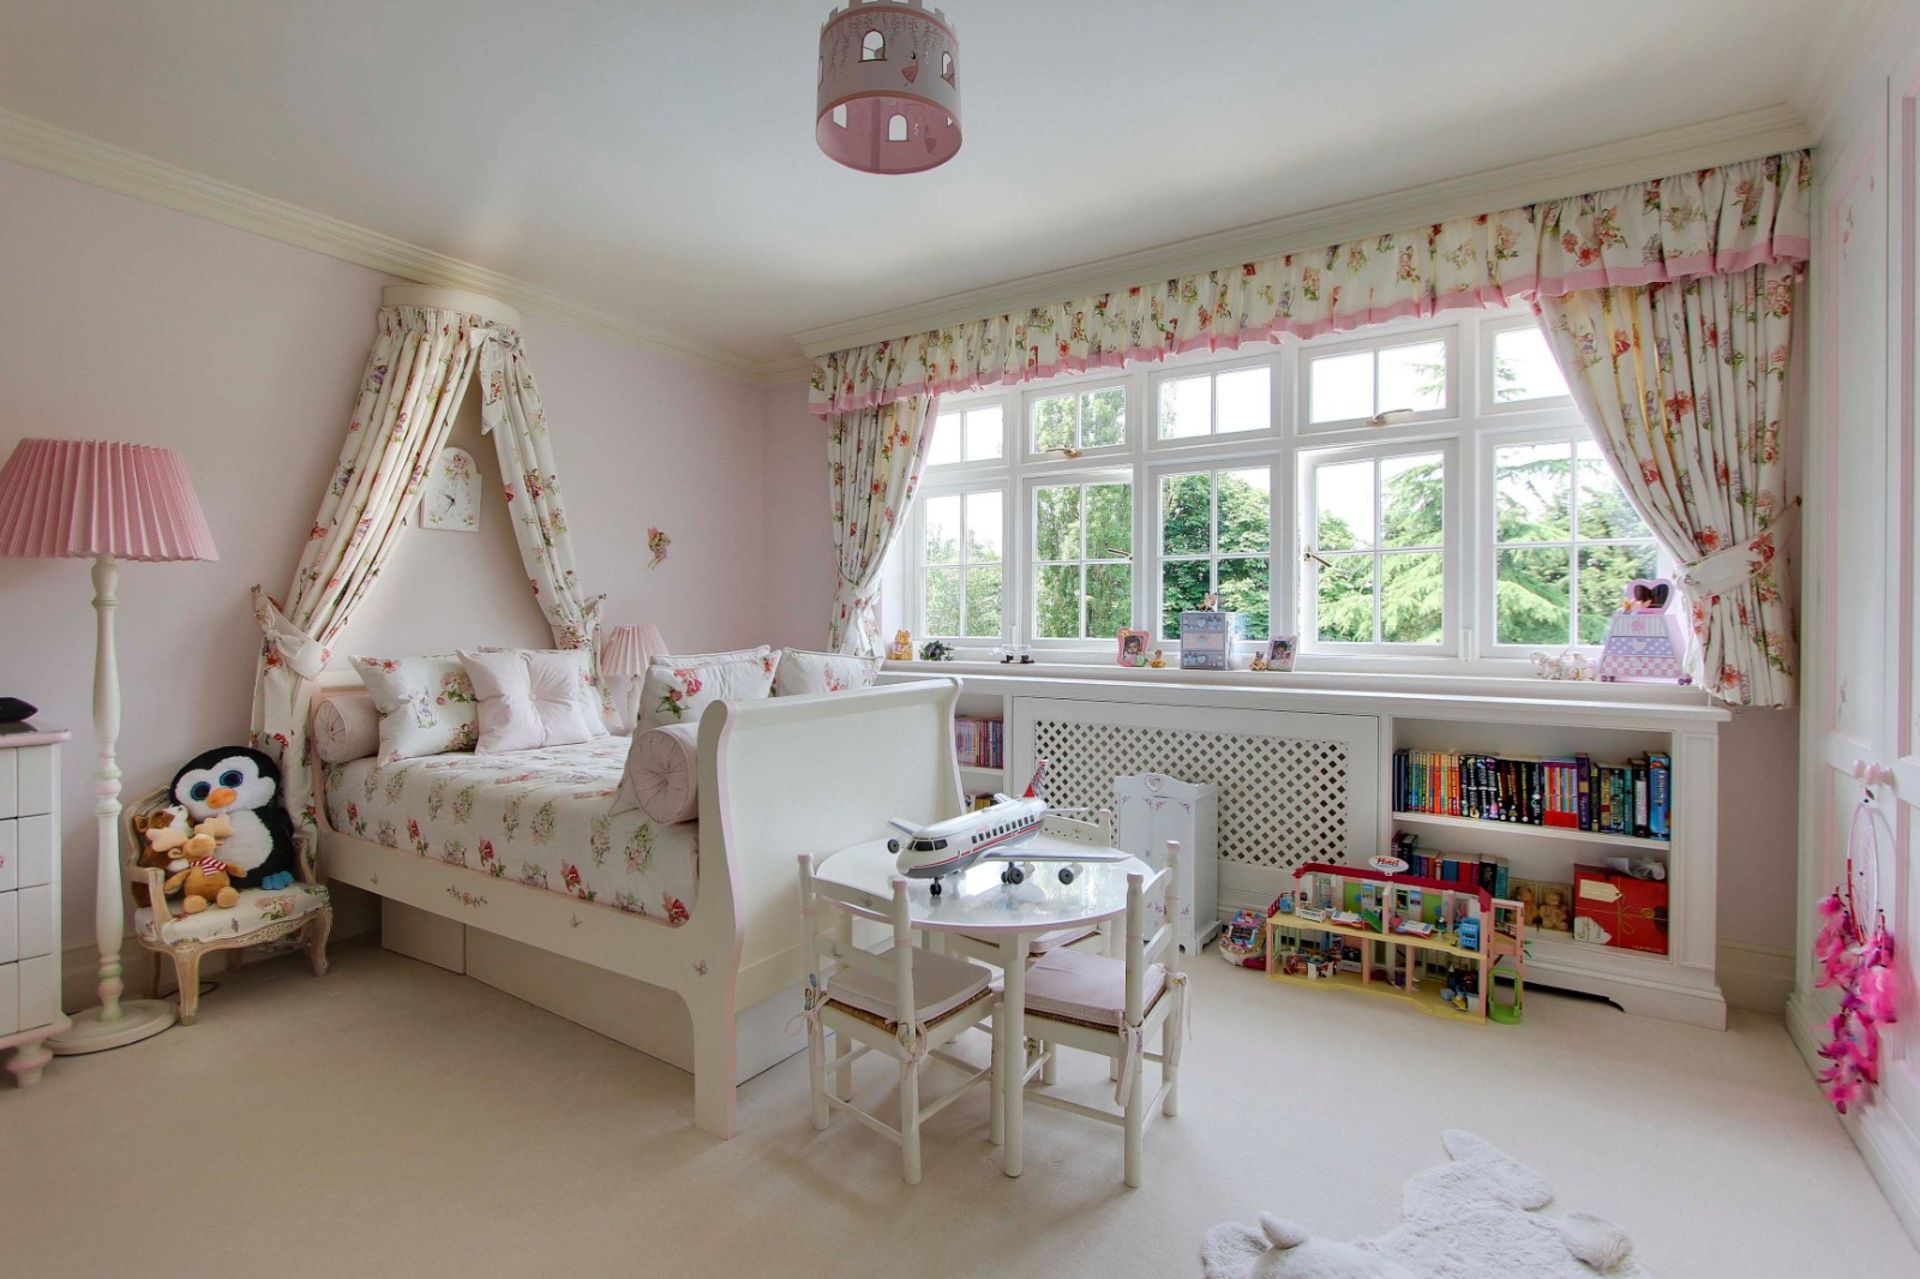 2 x sets of children room drapes one set gingham floral pattern and one set plain with pom pom - Image 3 of 3